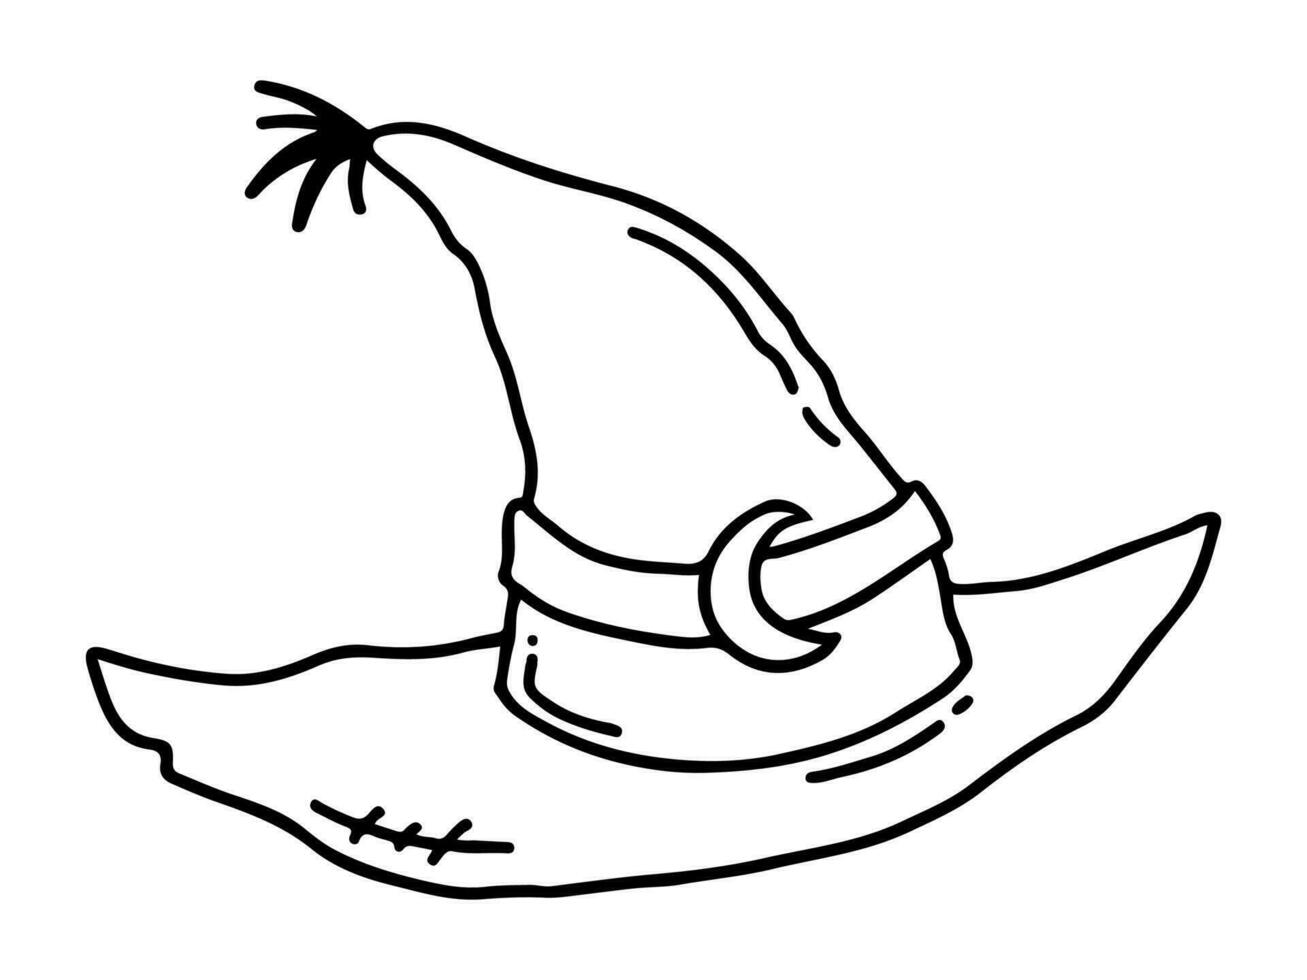 Hand drawn line illustration of witch hat with crescent picture in doodle style vector